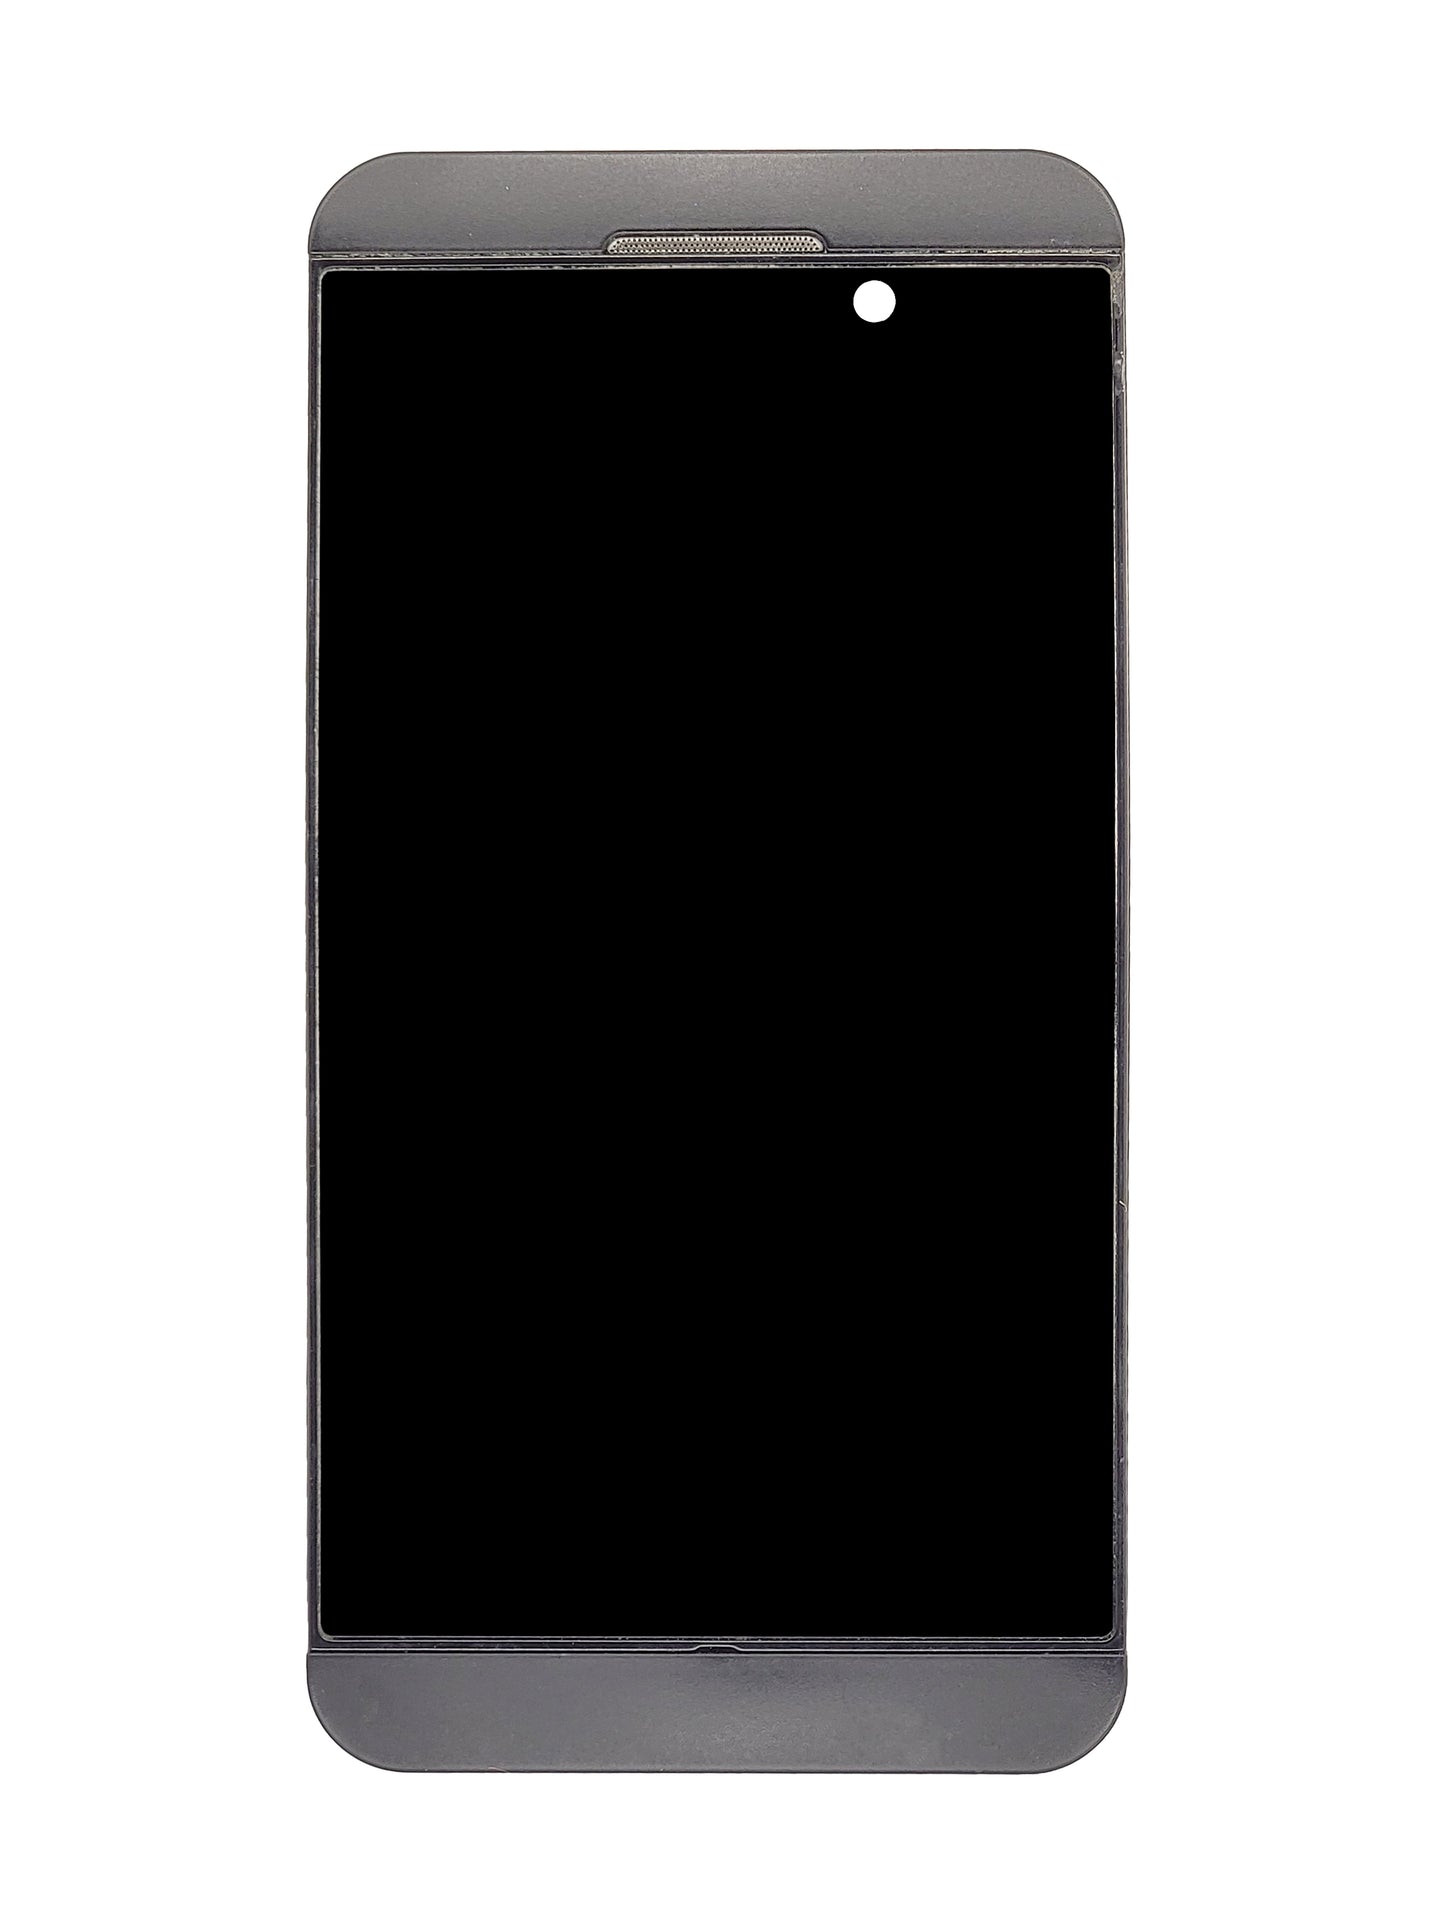 BB Z10 Screen Assembly (With The Frame) (Refurbished) (Black)